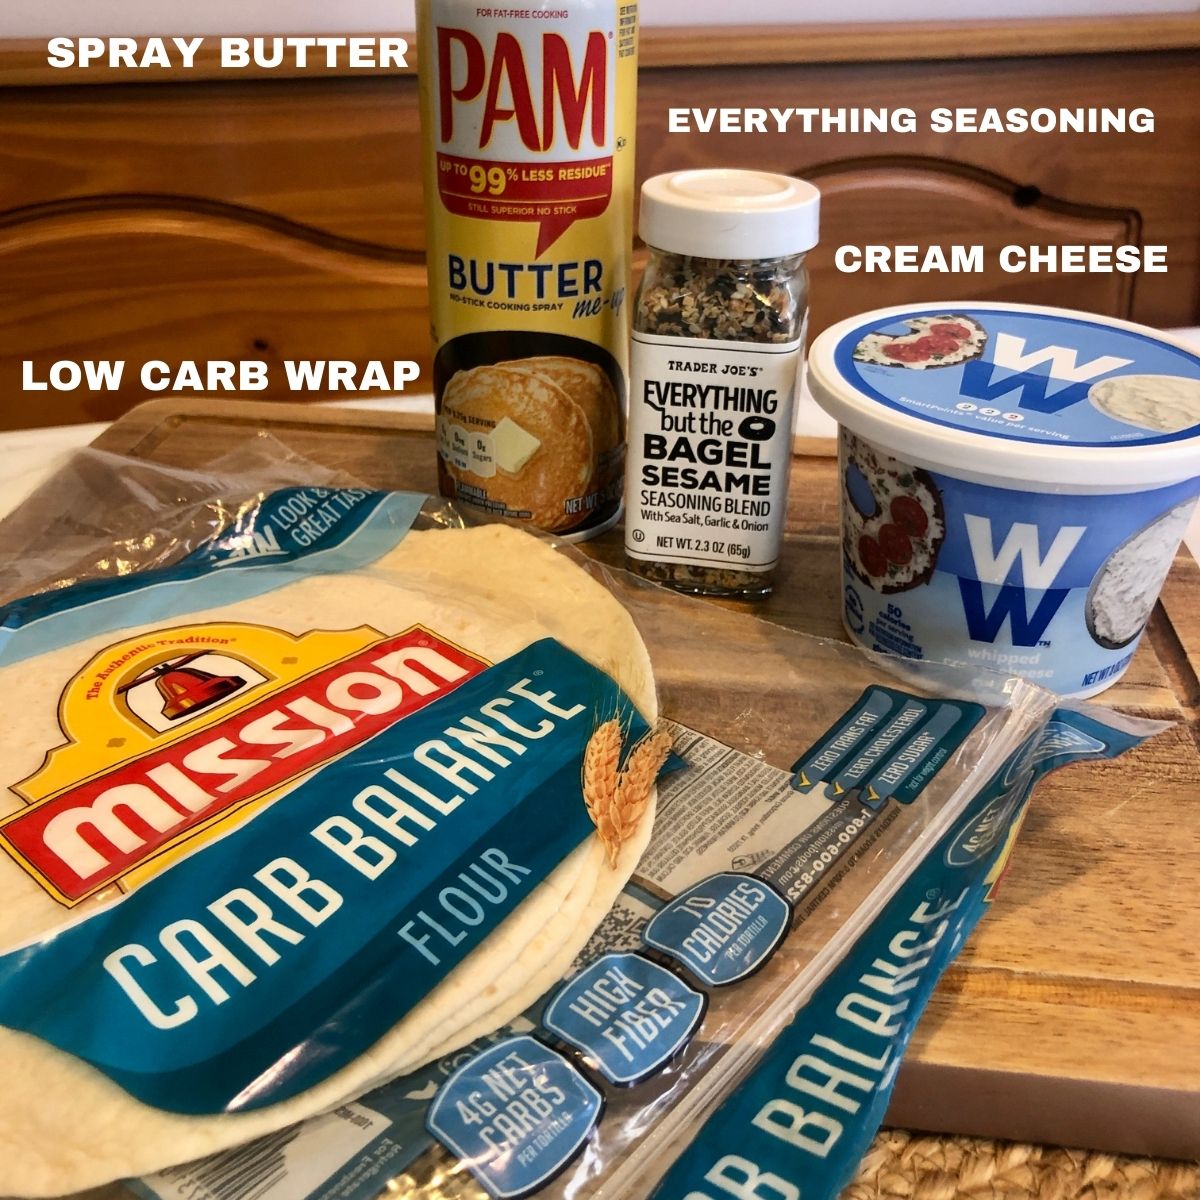 Ingredients for everything bagel bites - PAM butter spray, low carb tortillas,WW cream cheese and trader joes everything seasoning